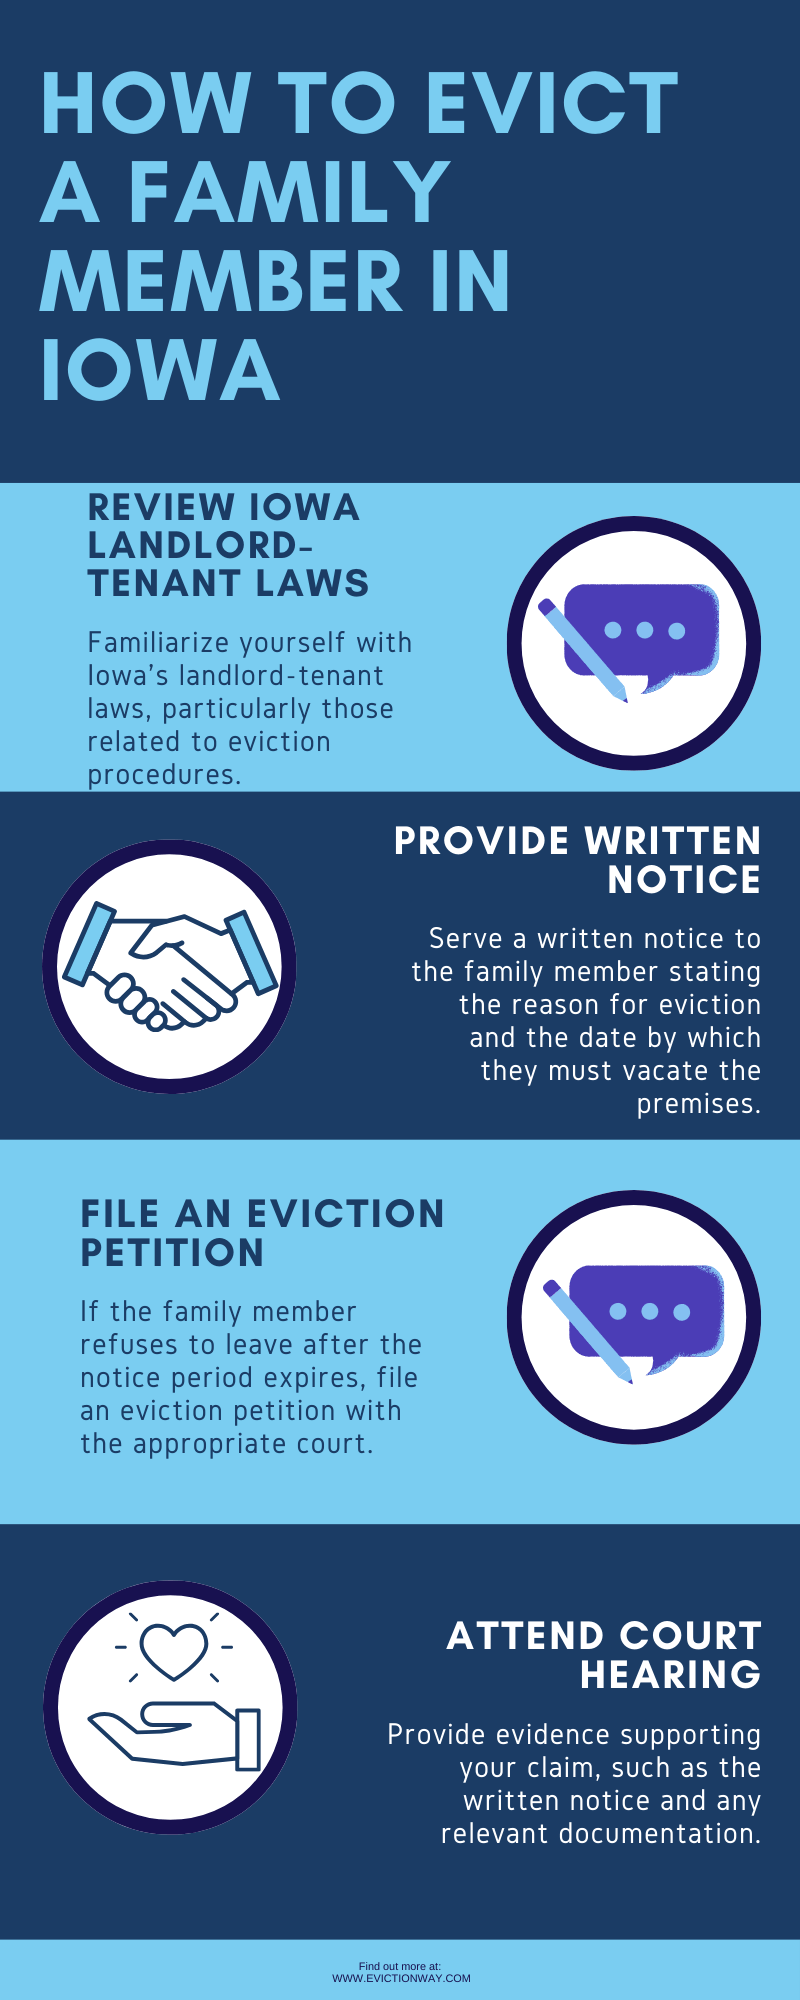 How to Evict a Family Member in Iowa